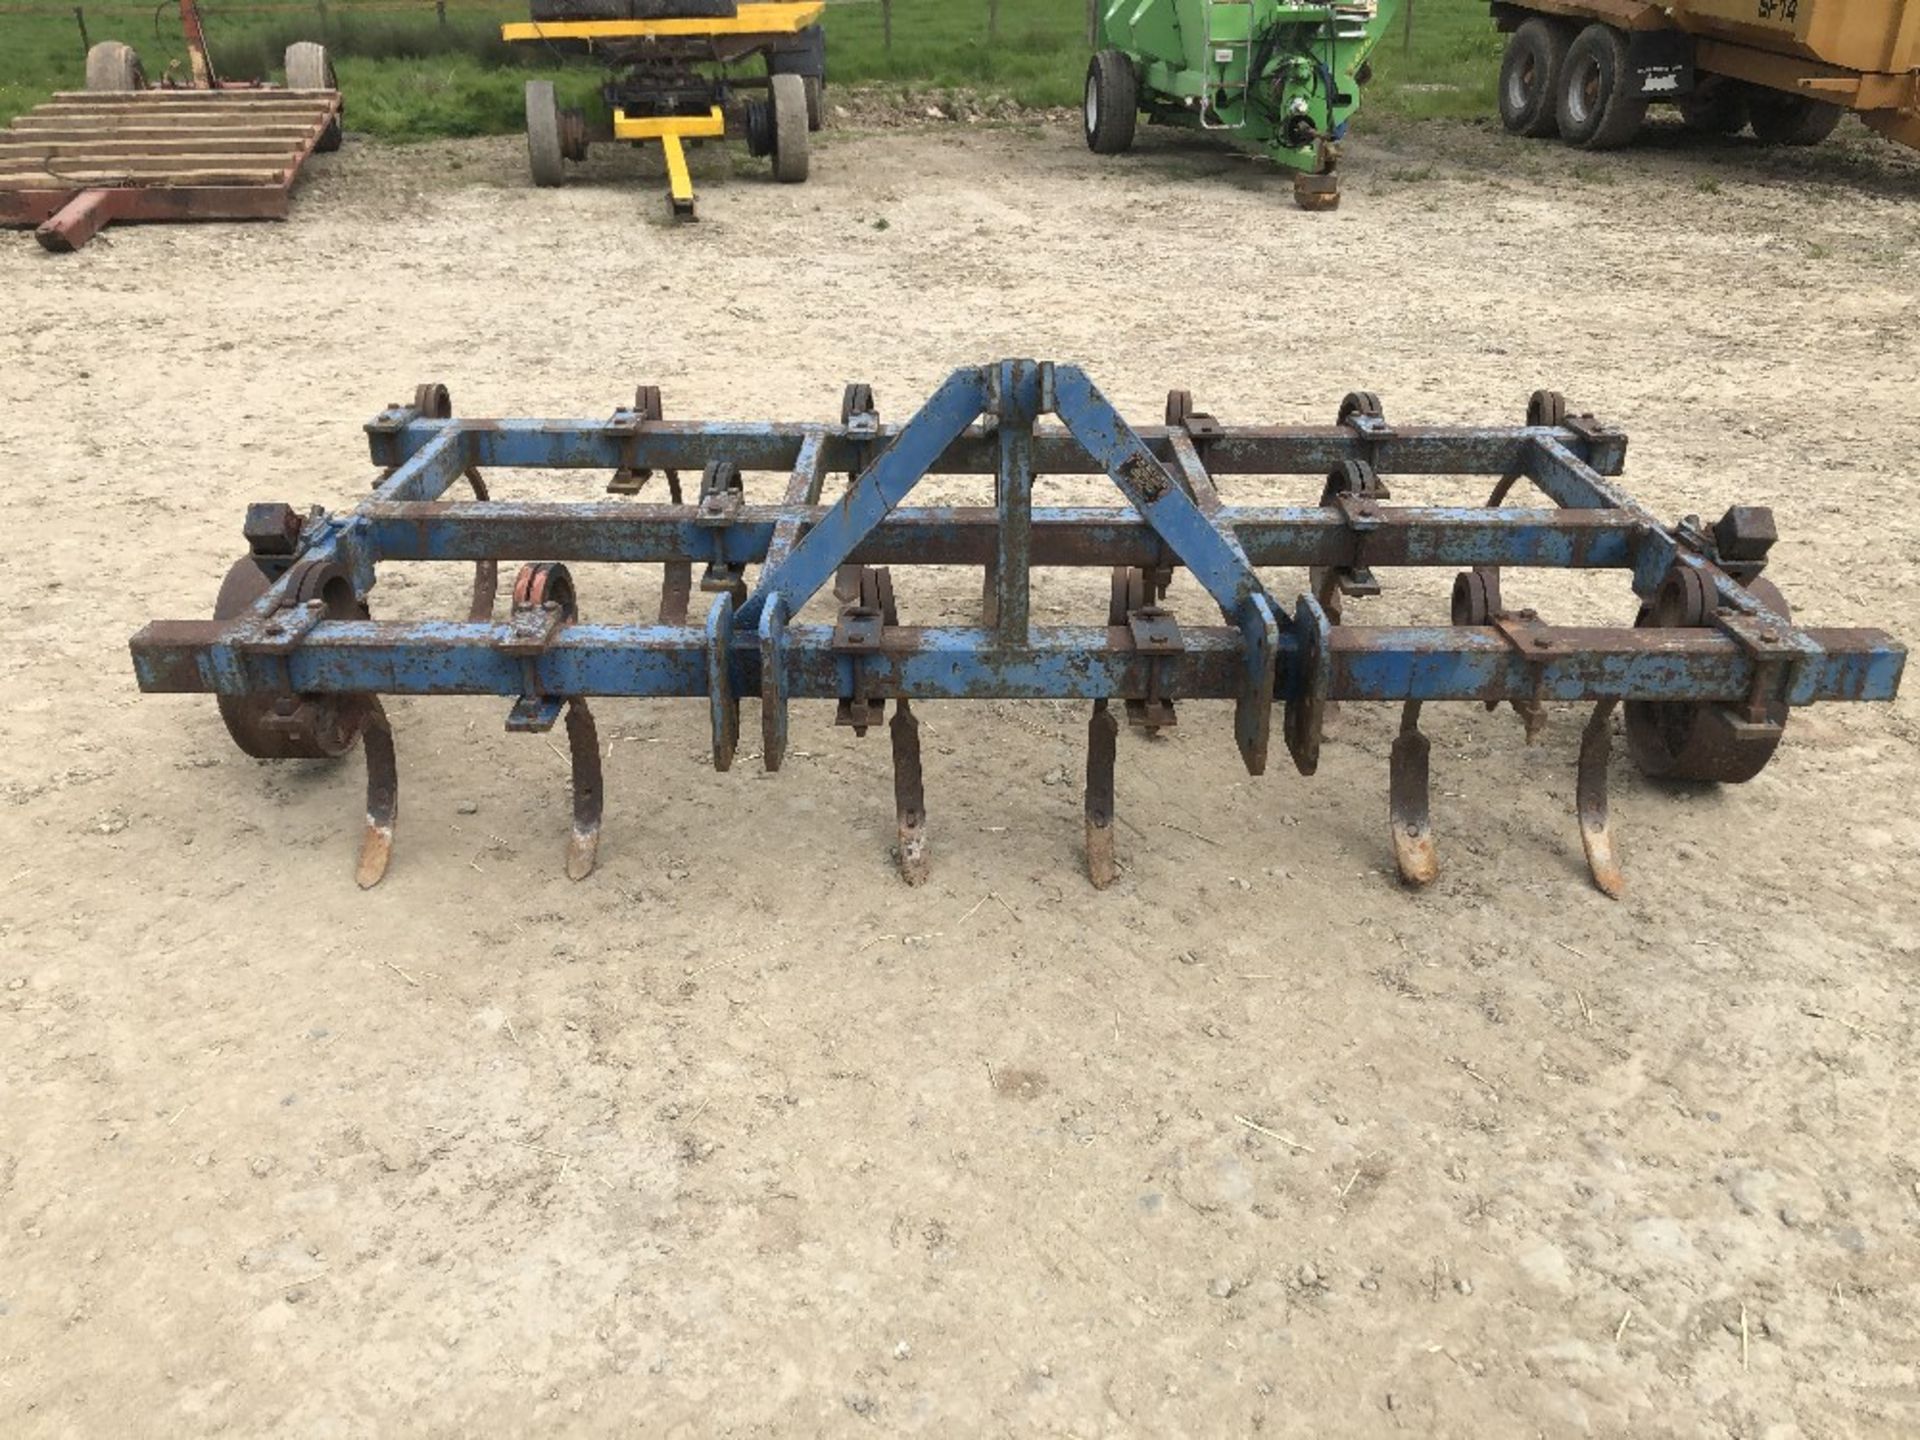 BLENCH SPRING TINE CULTIVATOR